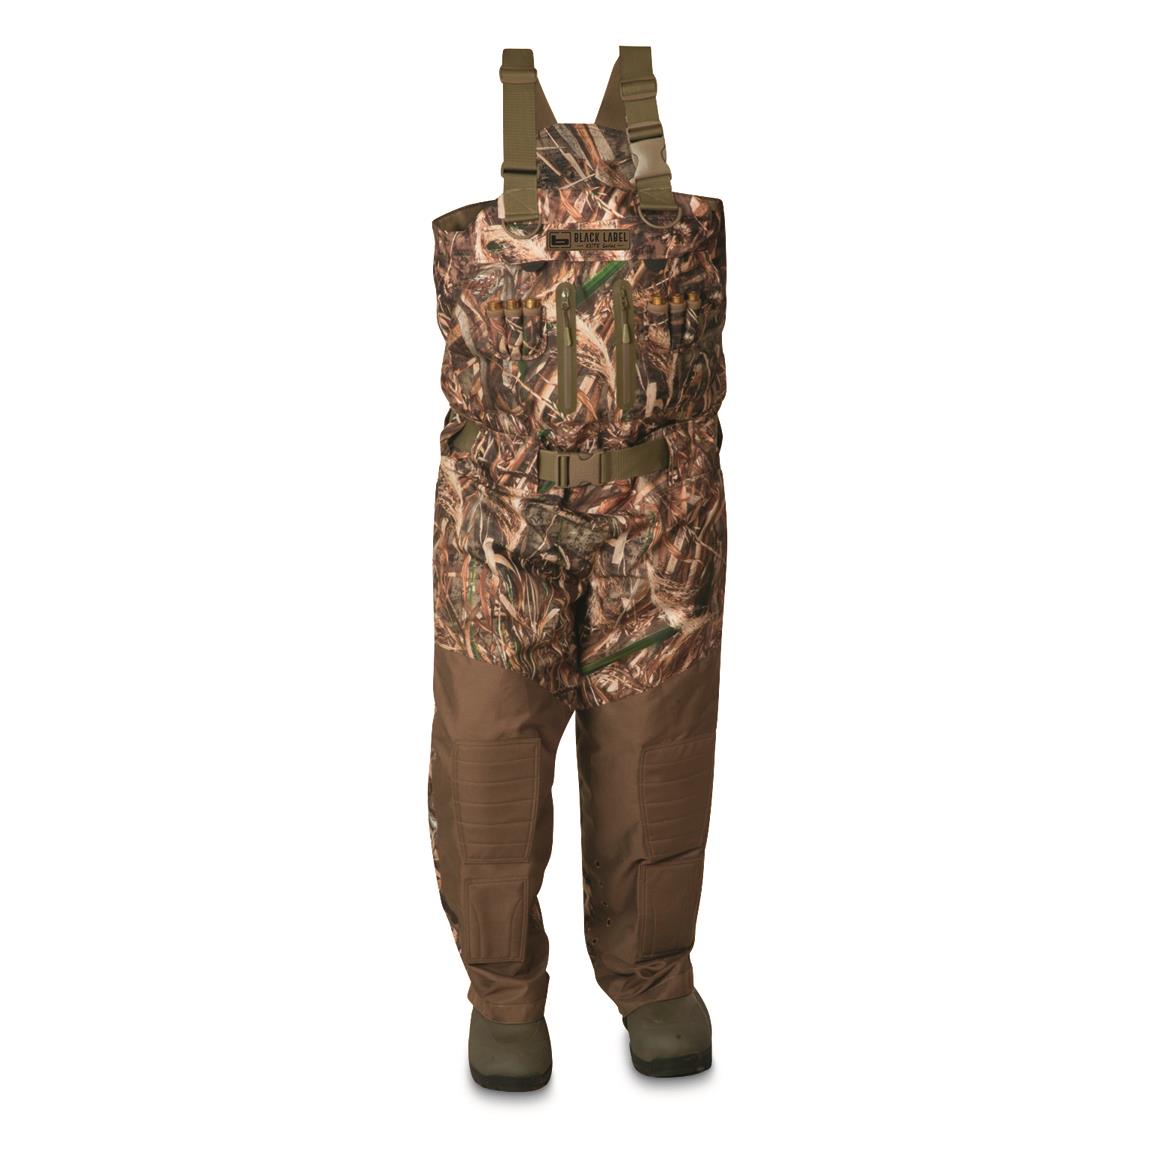 Banded Black Label 2.0 Elite Breathable Insulated Bootfoot Chest Waders, 2,000-gram, Stout Sizes, Realtree MAX-5®